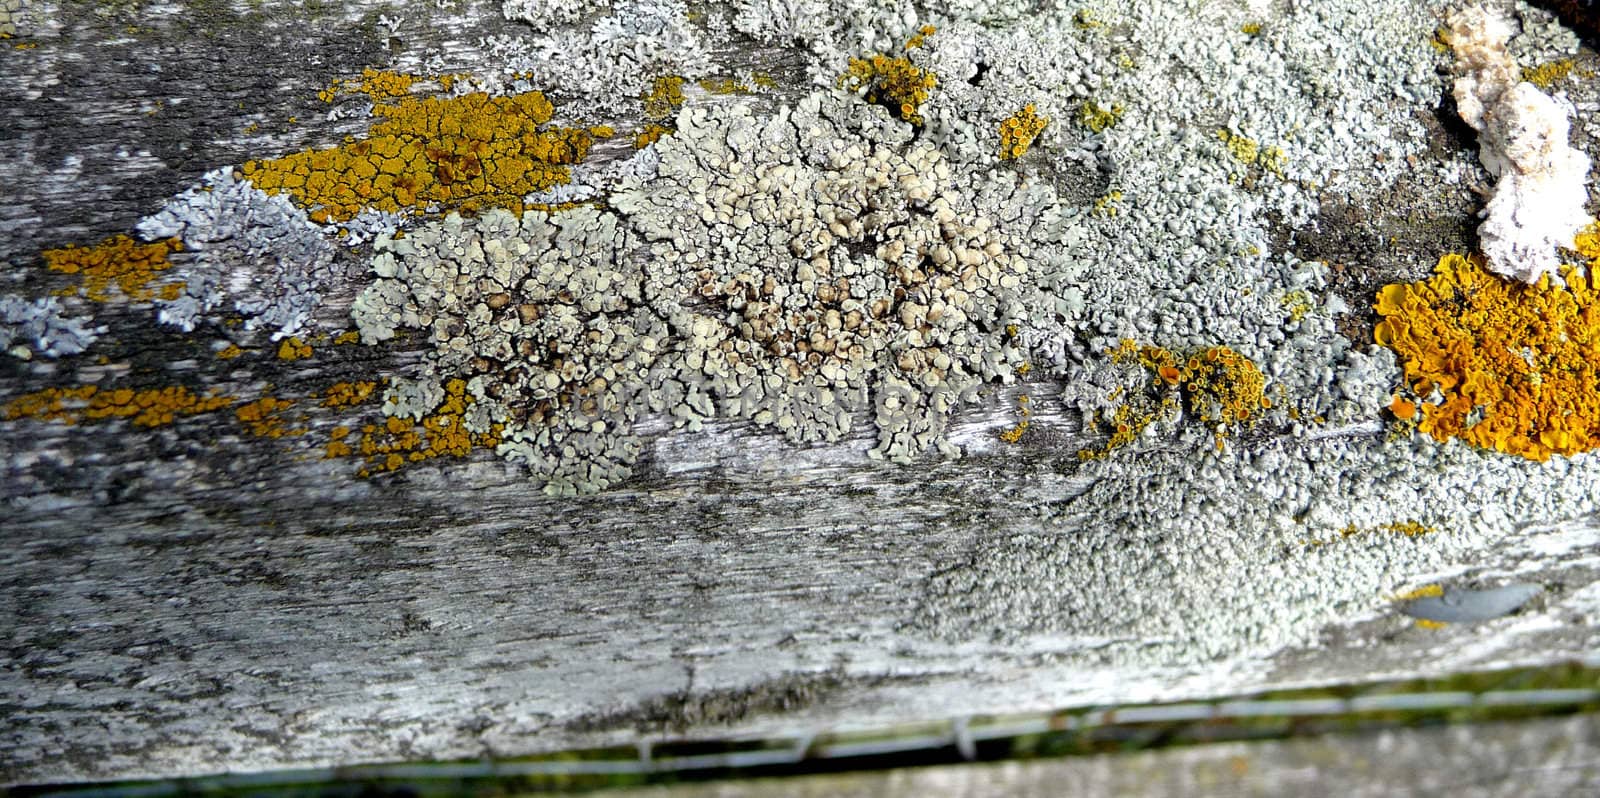 A photograph of some Lichen on wood it would make an interesting texture background.